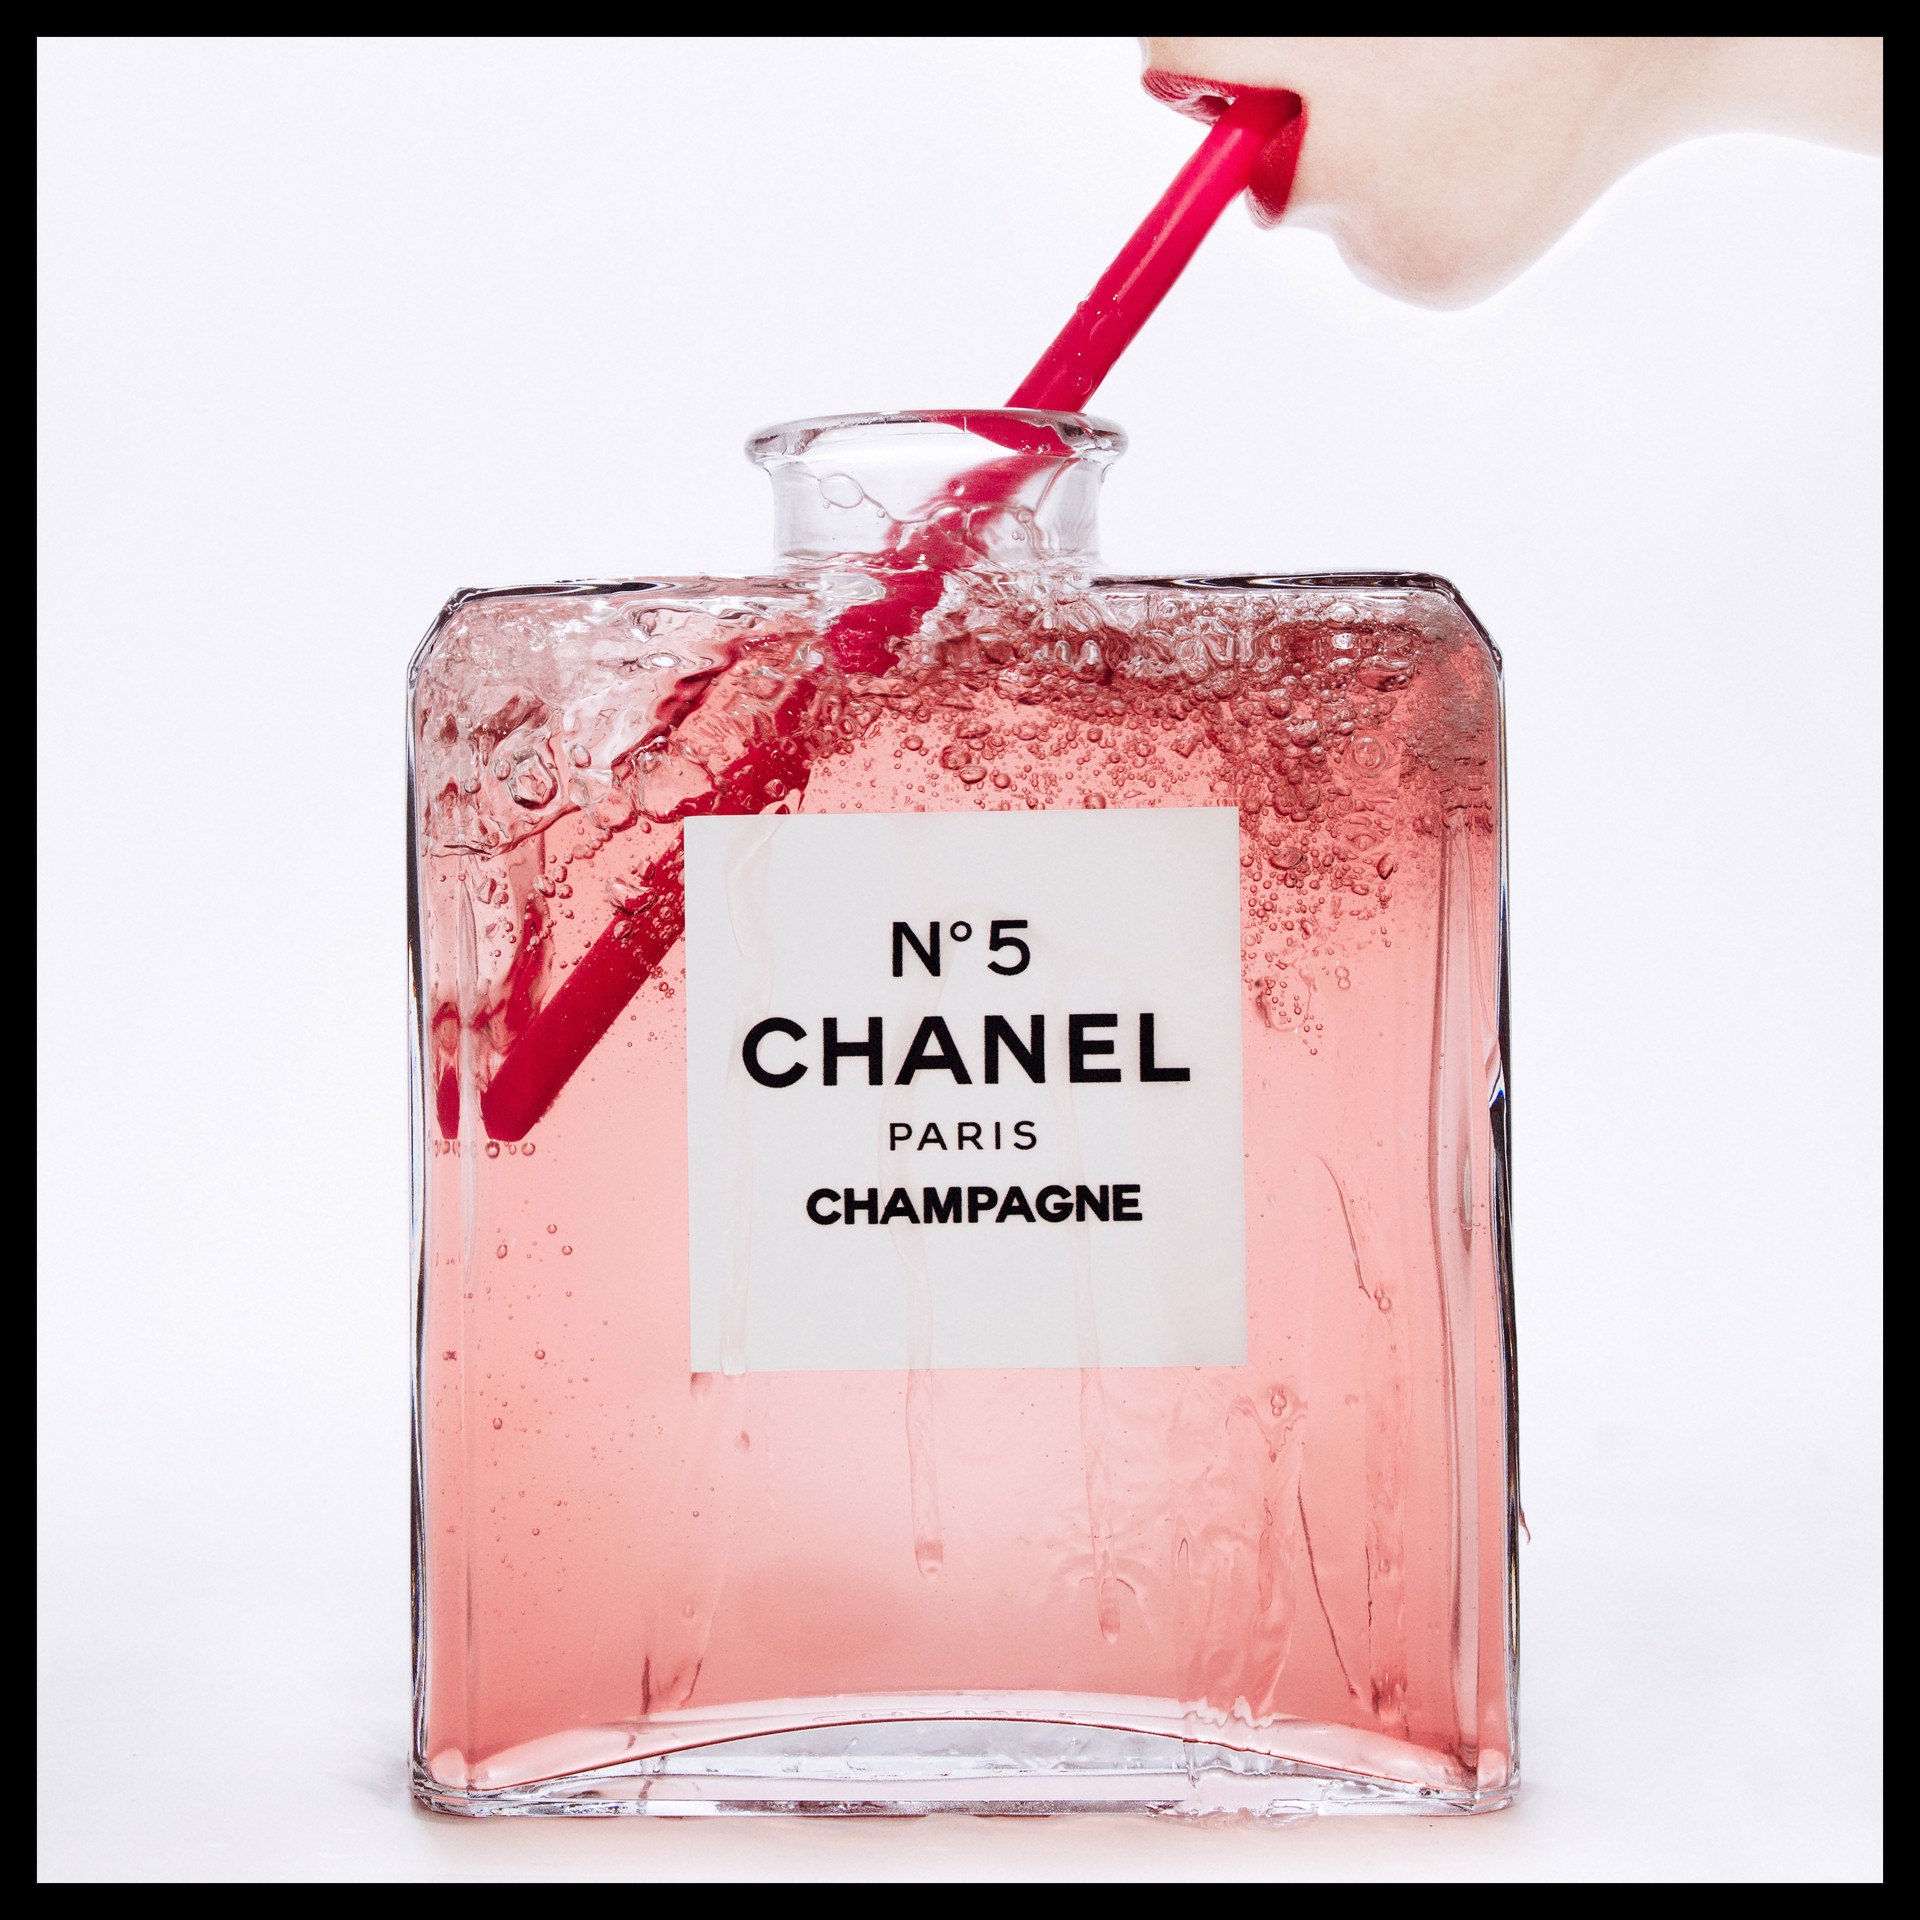 Chanel Champagne by Tyler Shields